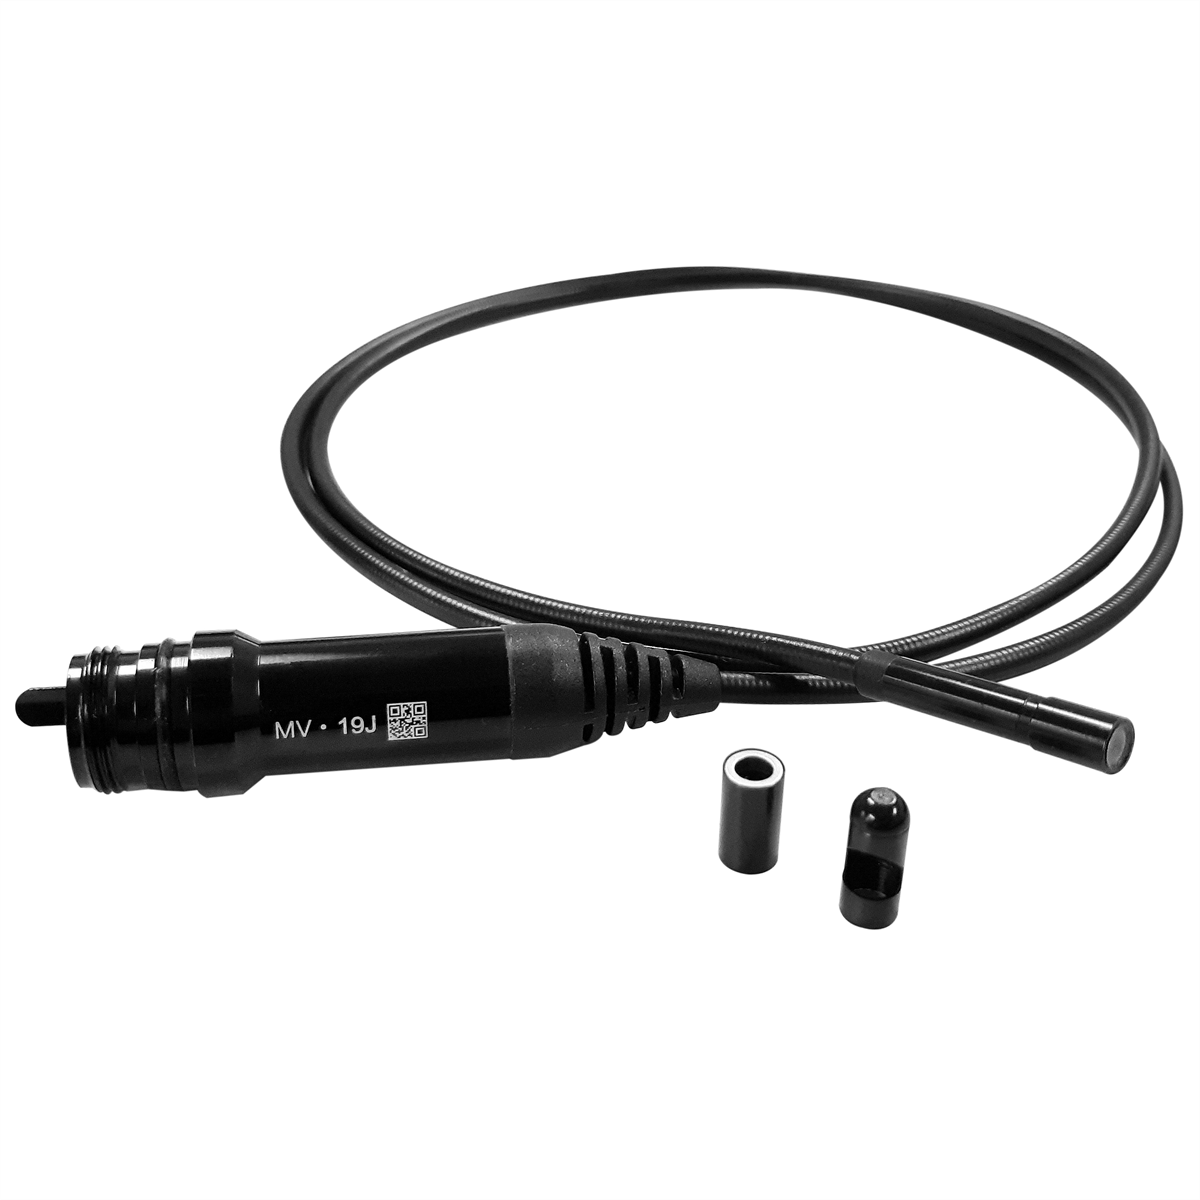 5.5mm Imager Head with Single Camera and 3’ Cable for MV480, MV460 and MV160